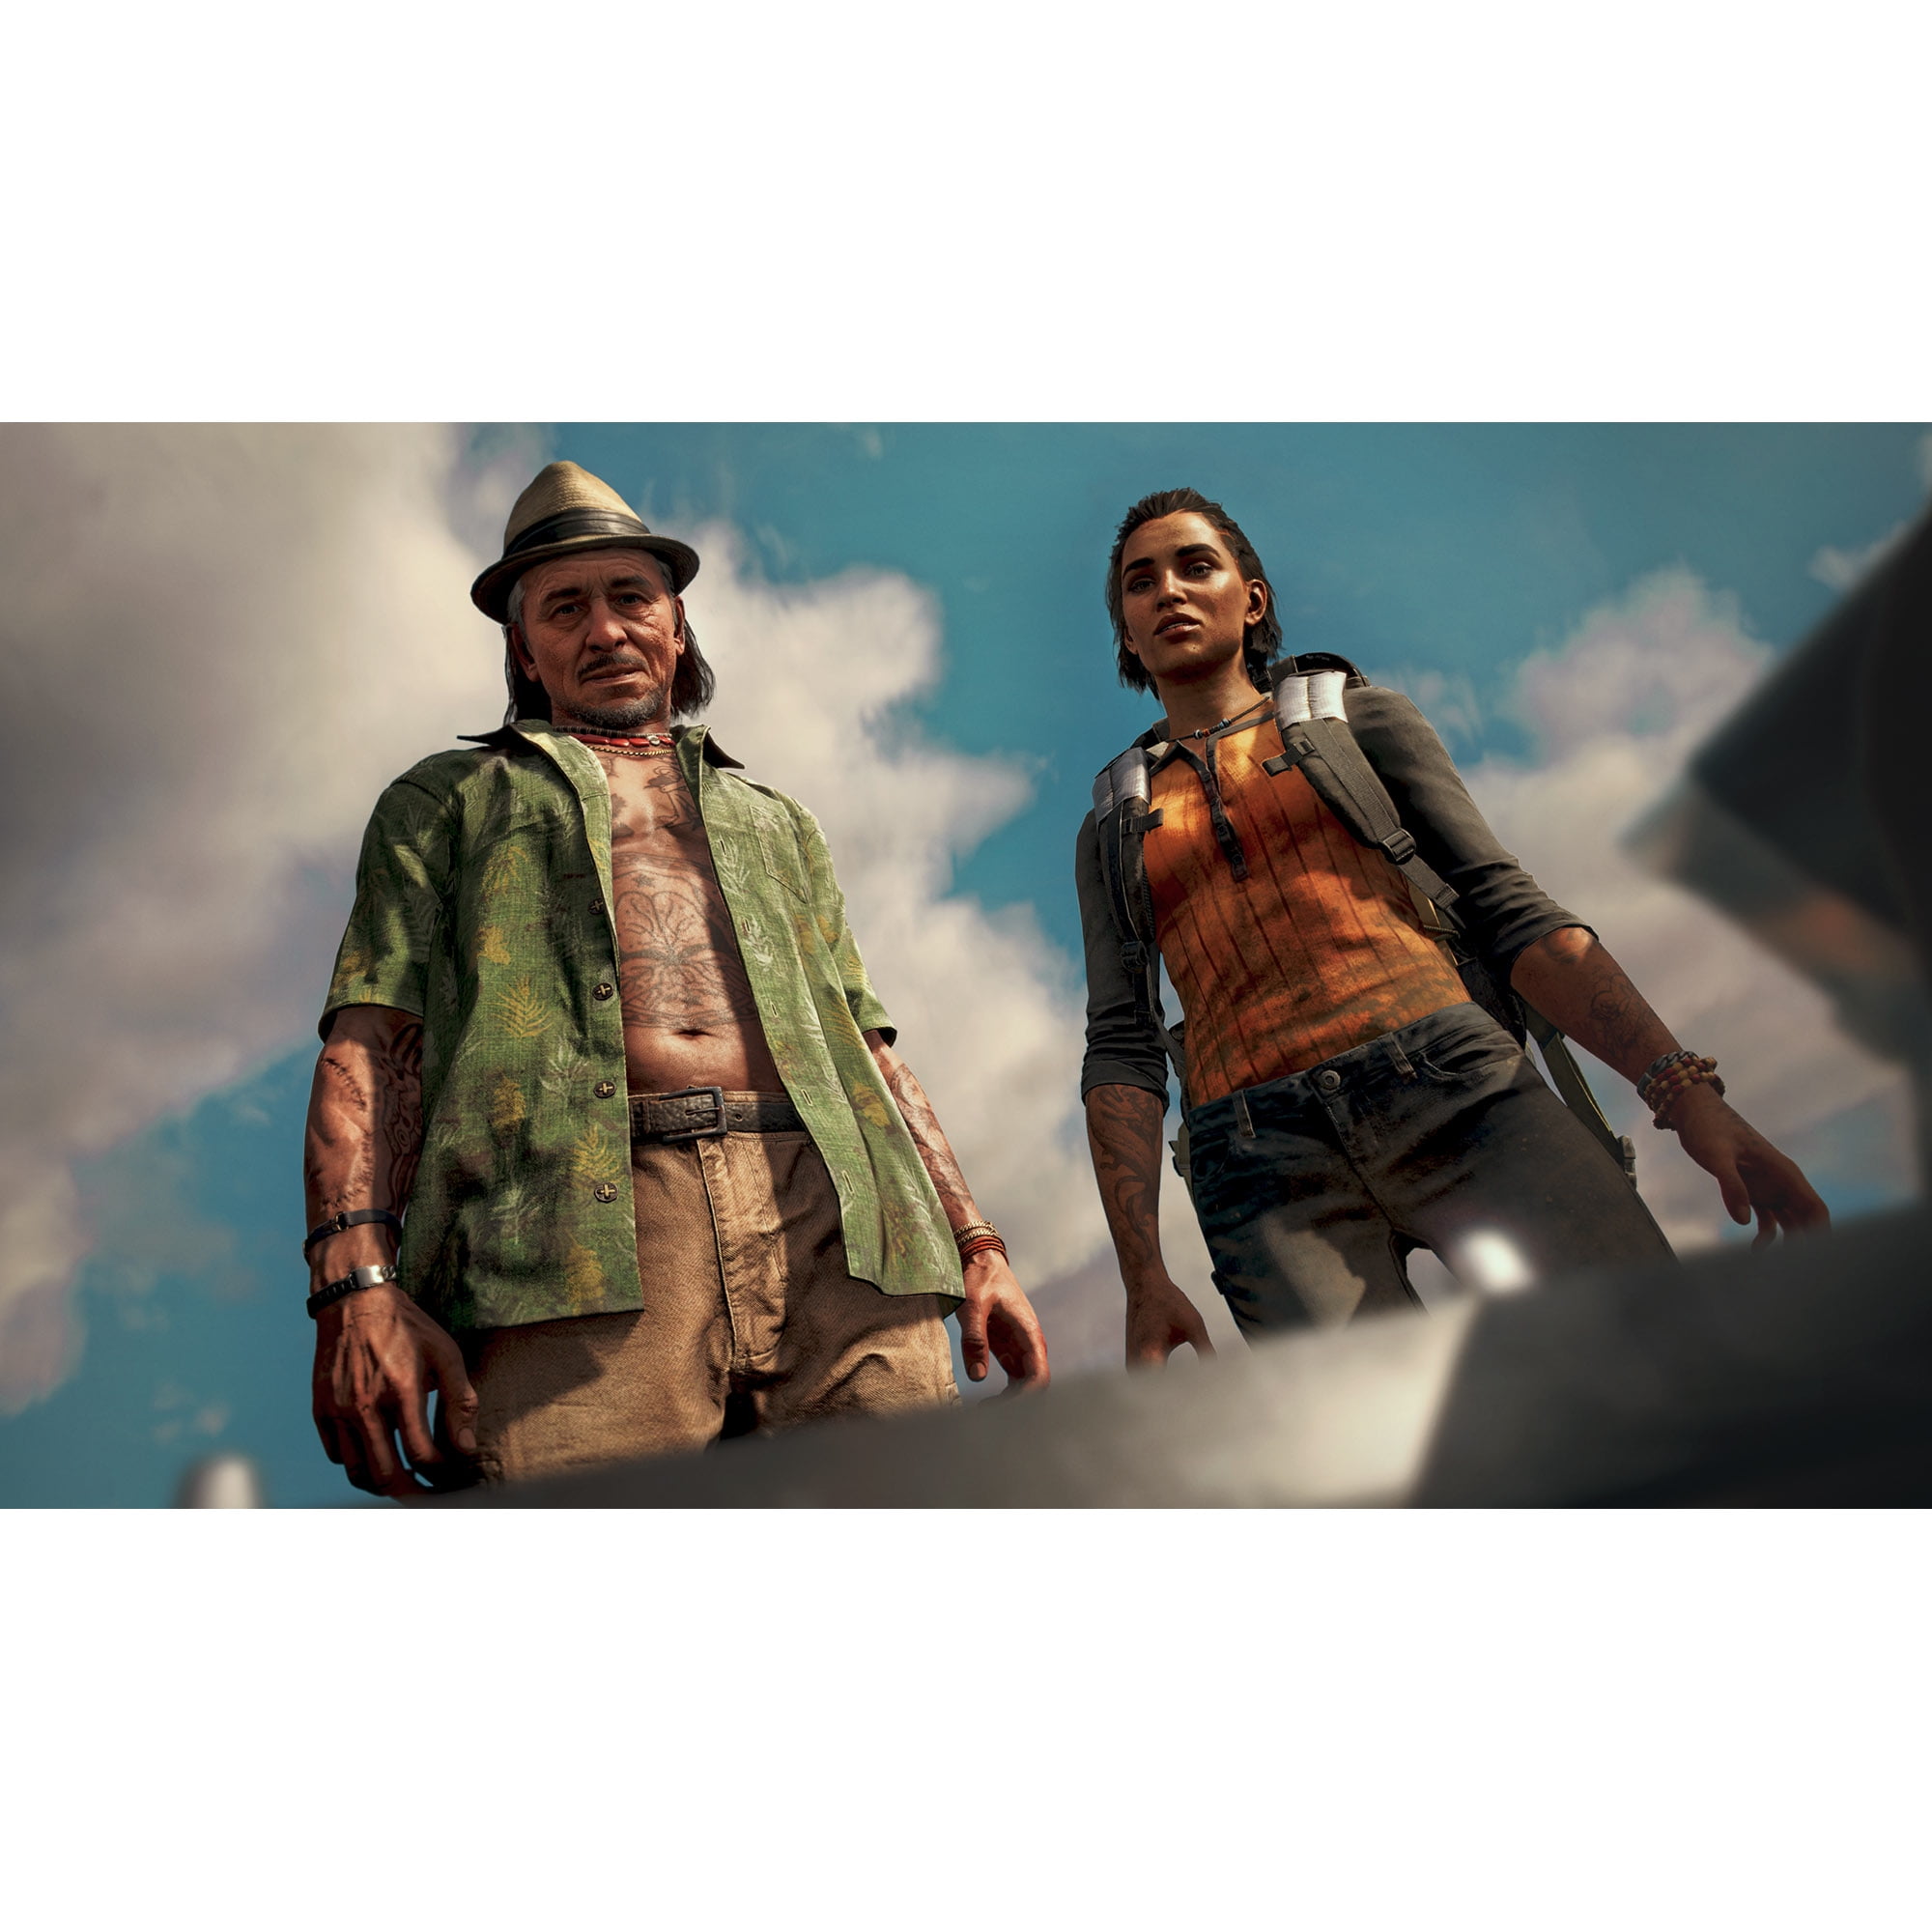 Far Cry 6 for Xbox One, PS4 & More